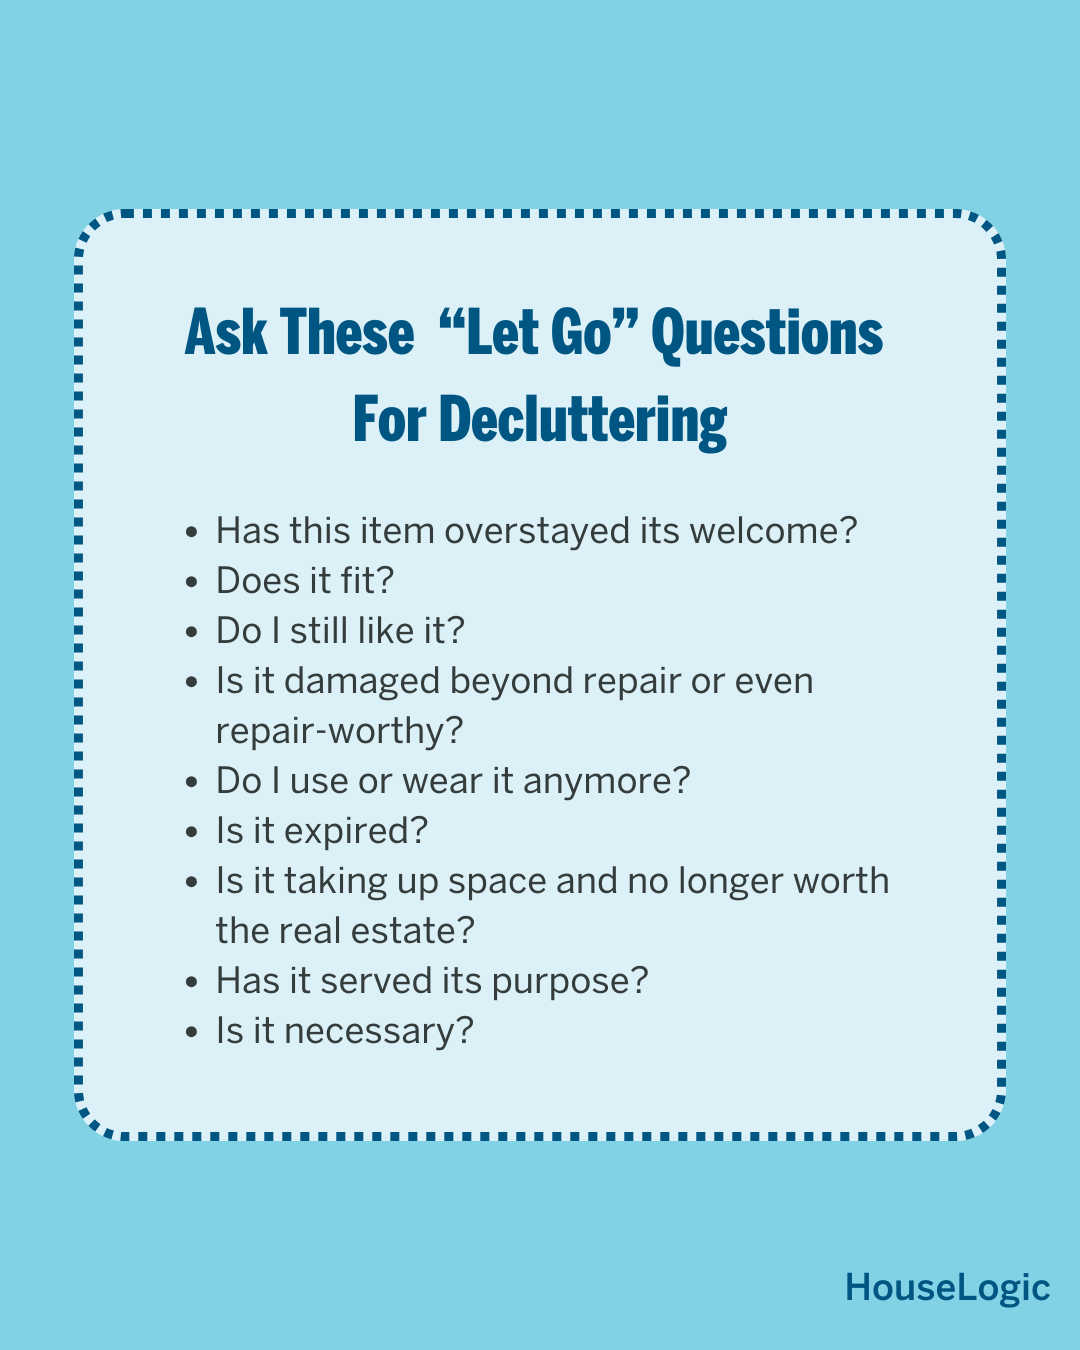 An infographic sharing the "Let Go" questions one could ask to help declutter such as "Do I use or wear it anymore" and "Do I still like it?"